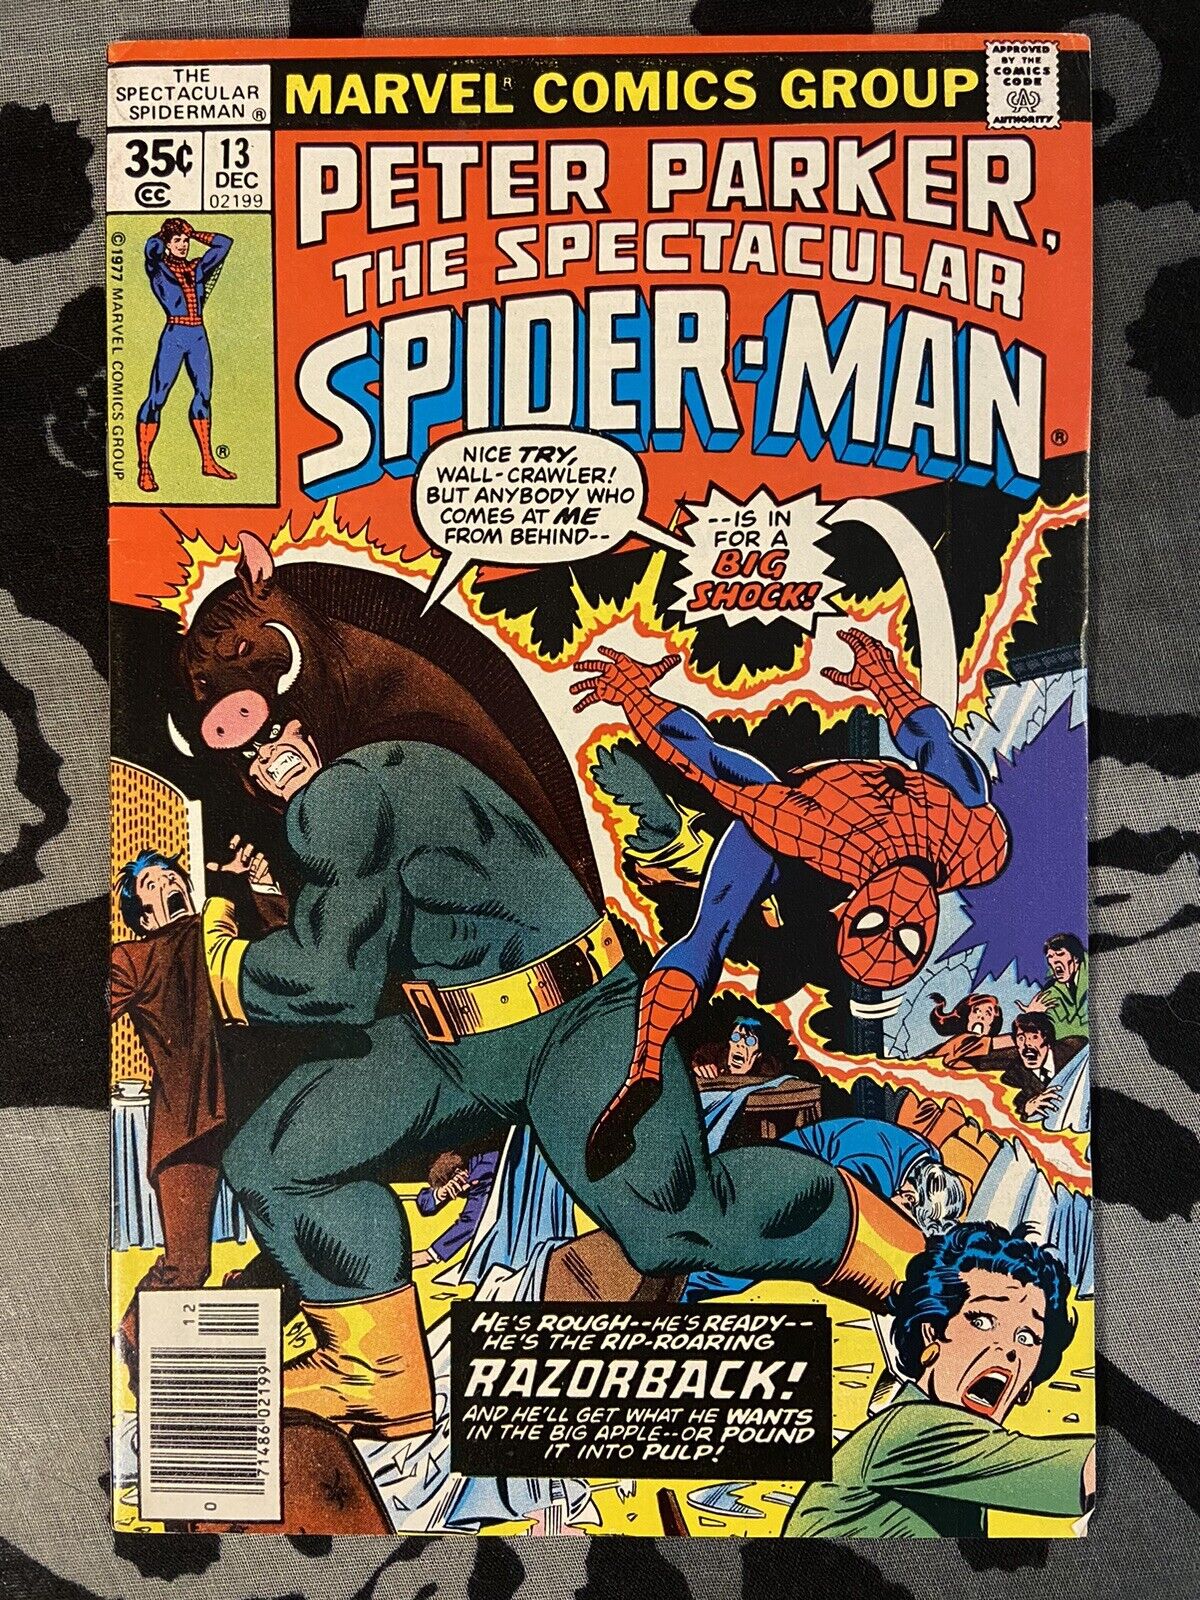 PETER PARKER THE SPECTACULAR SPIDER-MAN #13 (1977) 1st APPEARANCE OF RAZORBACK